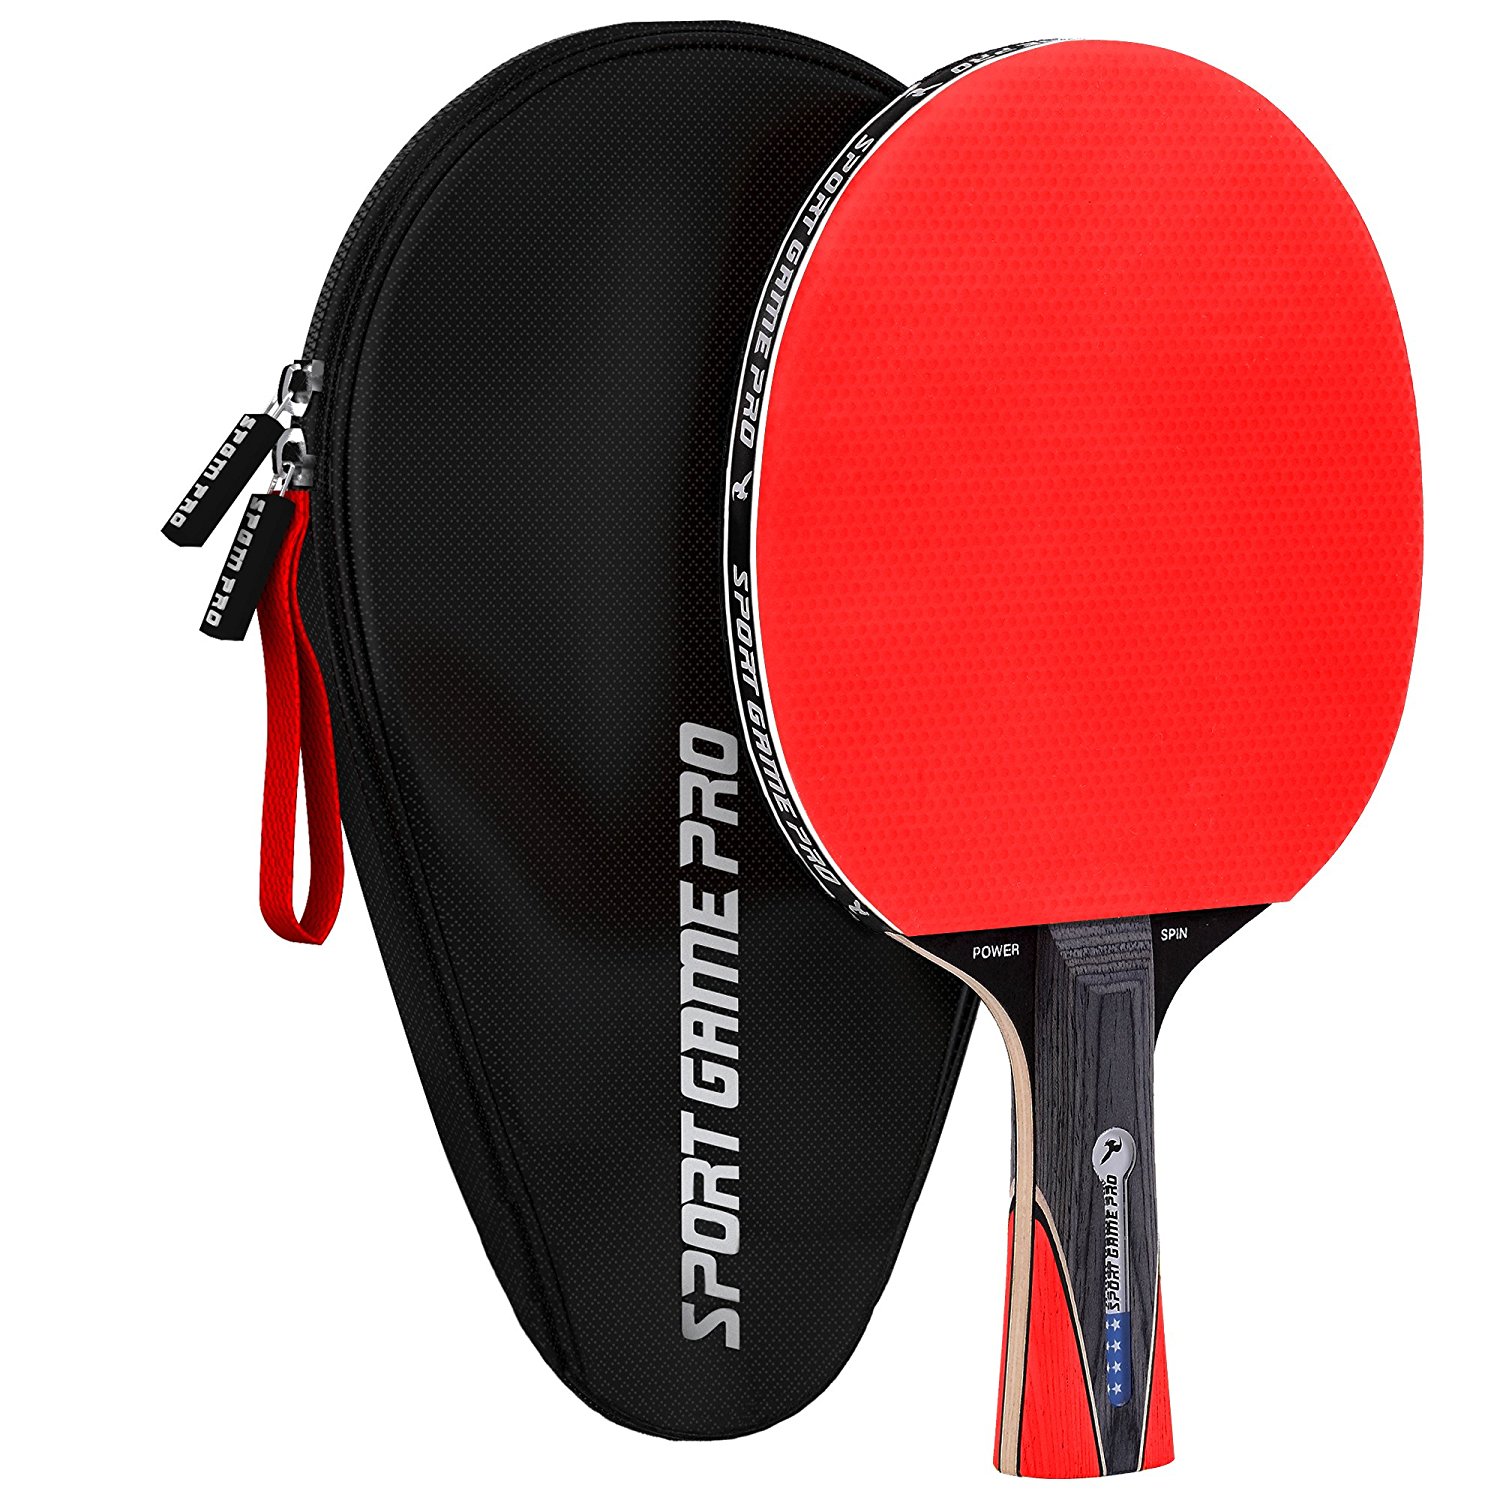 Amazon.com : Sport Game Pro Ping Pong Paddle with Killer Spin ...